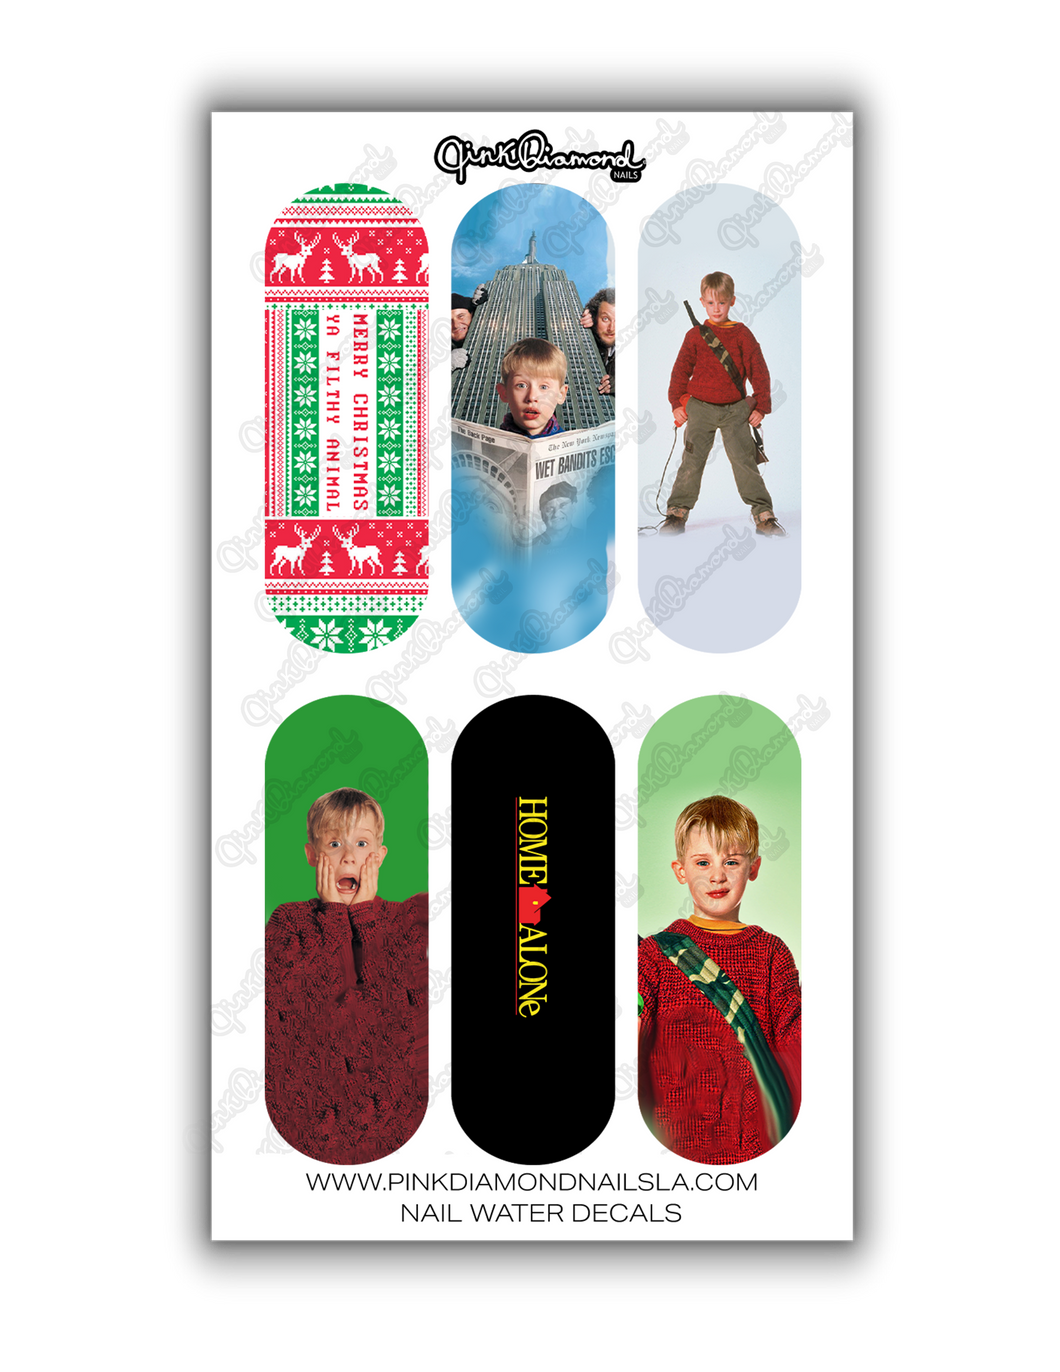 Nail water decals- XL Home alone